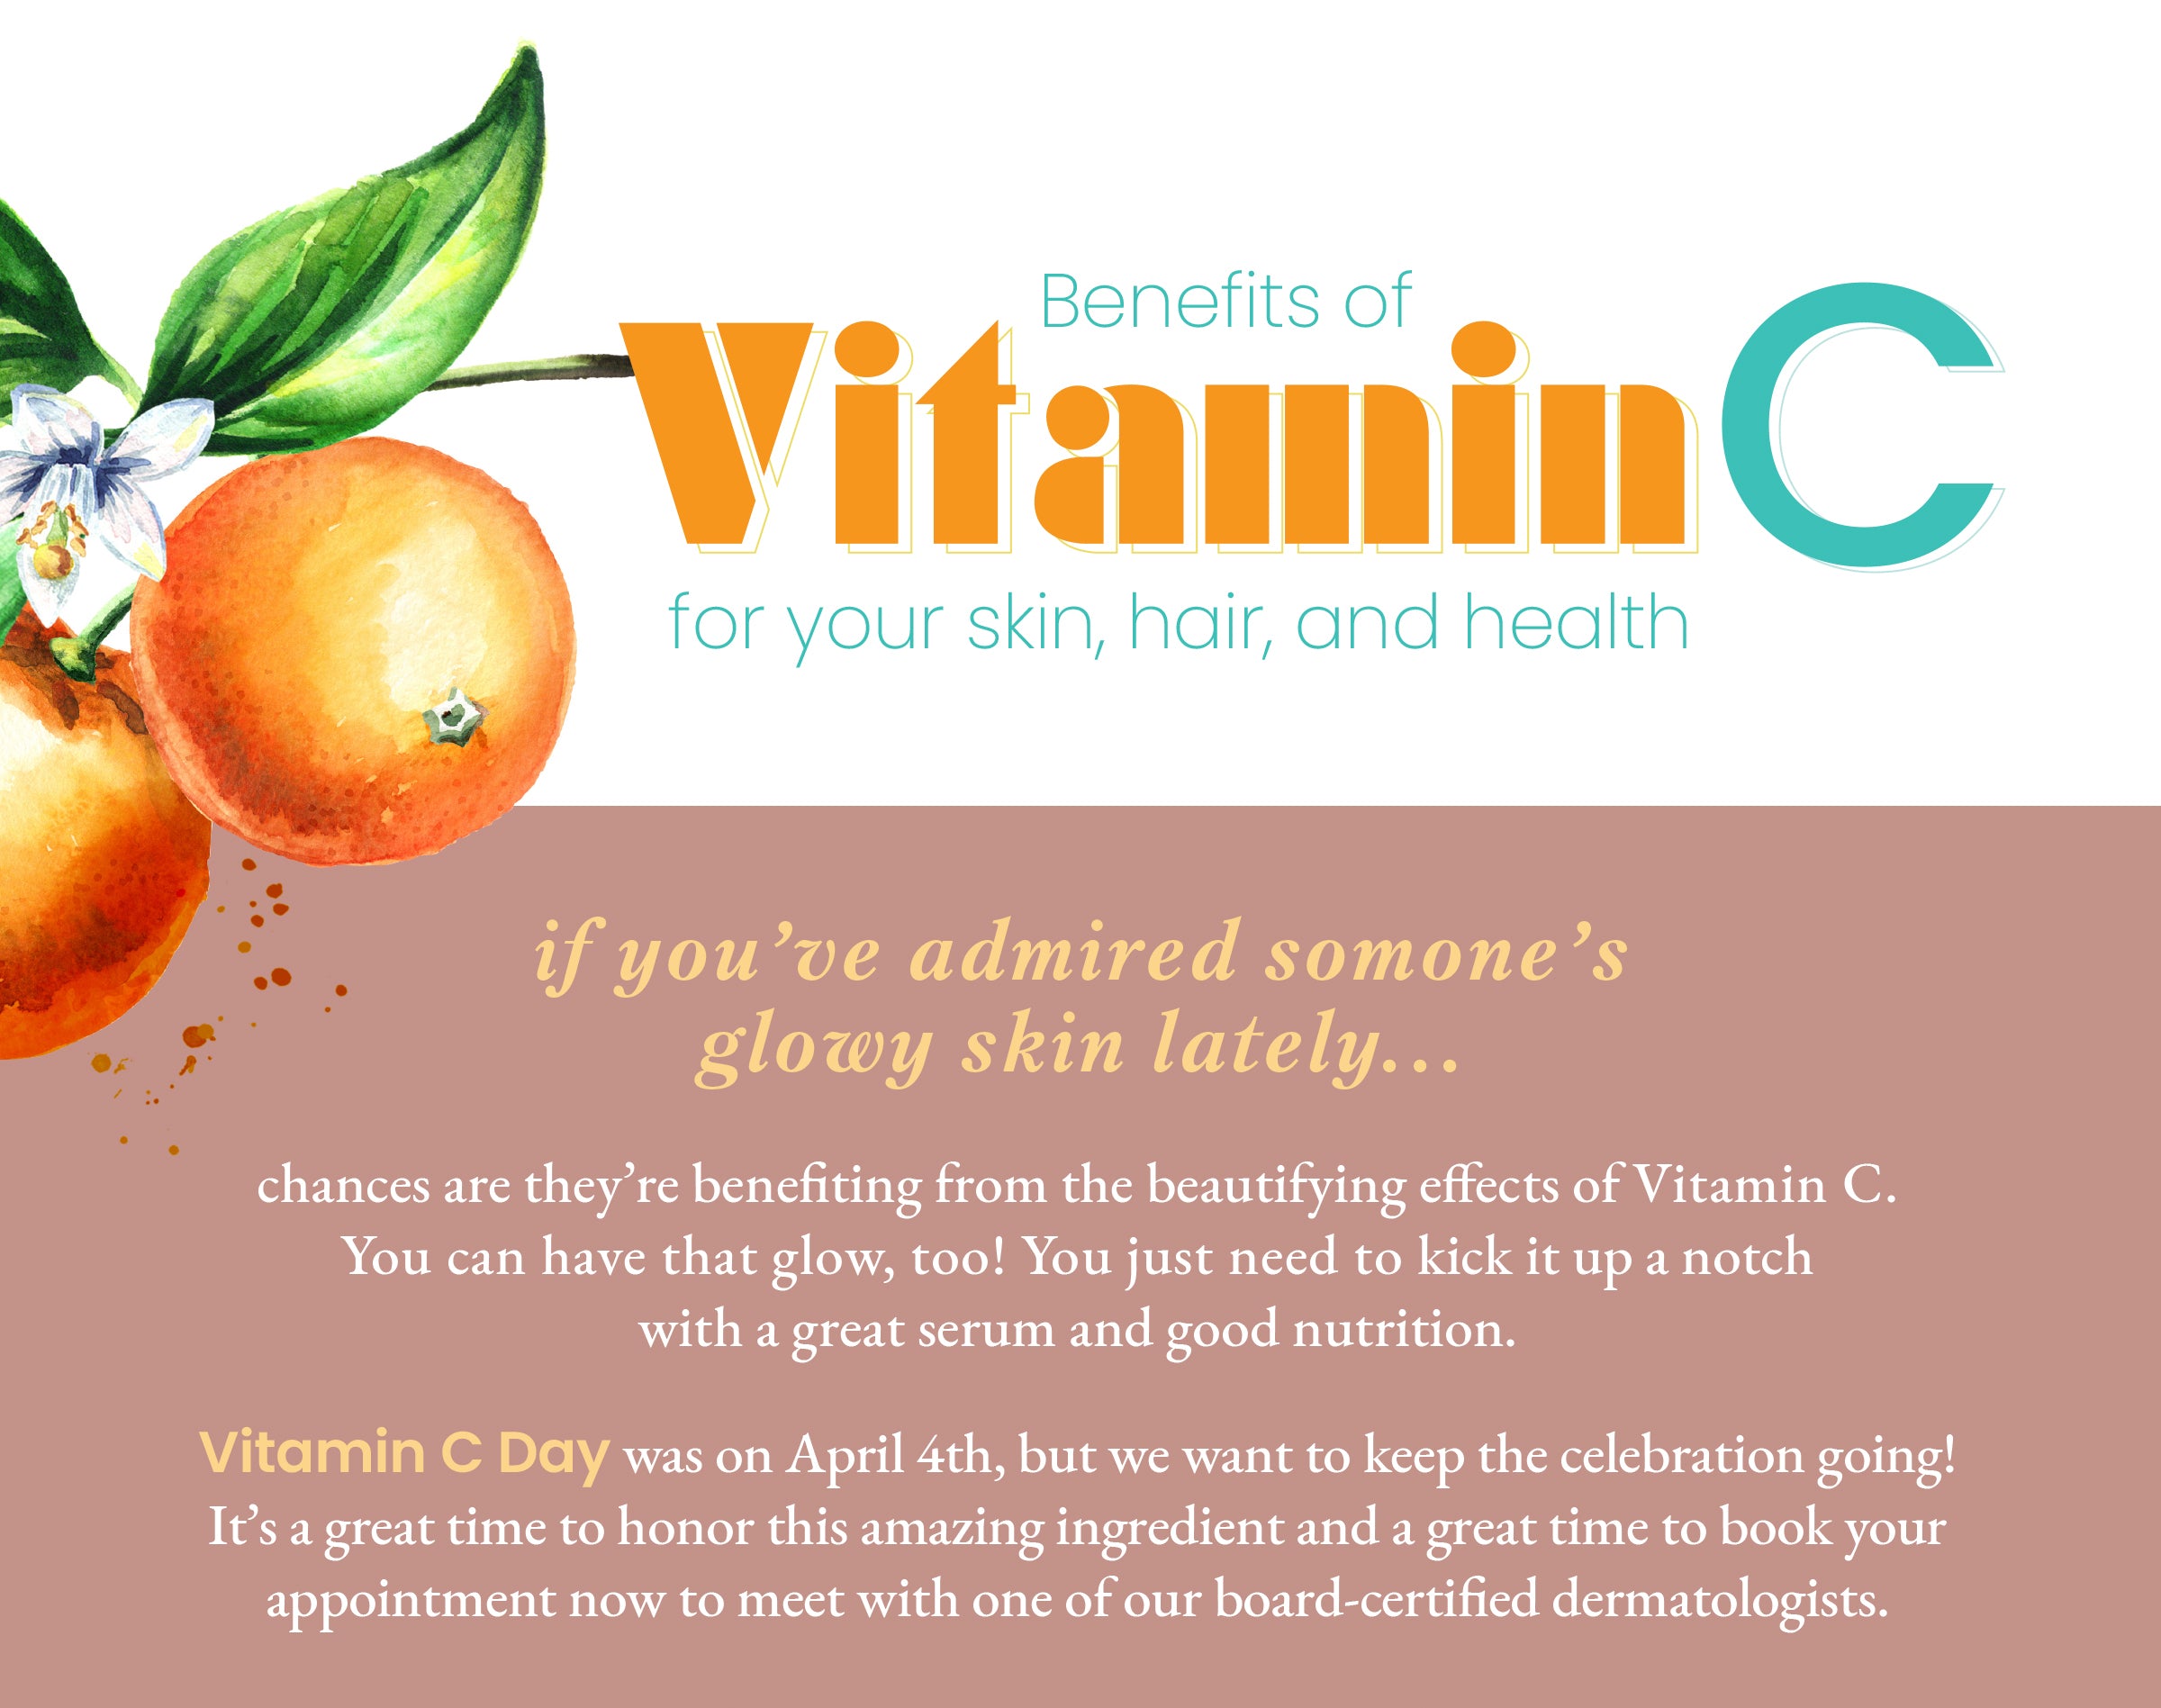 Vitamin C: How it Can Benefit Your Skin and Health 🍊